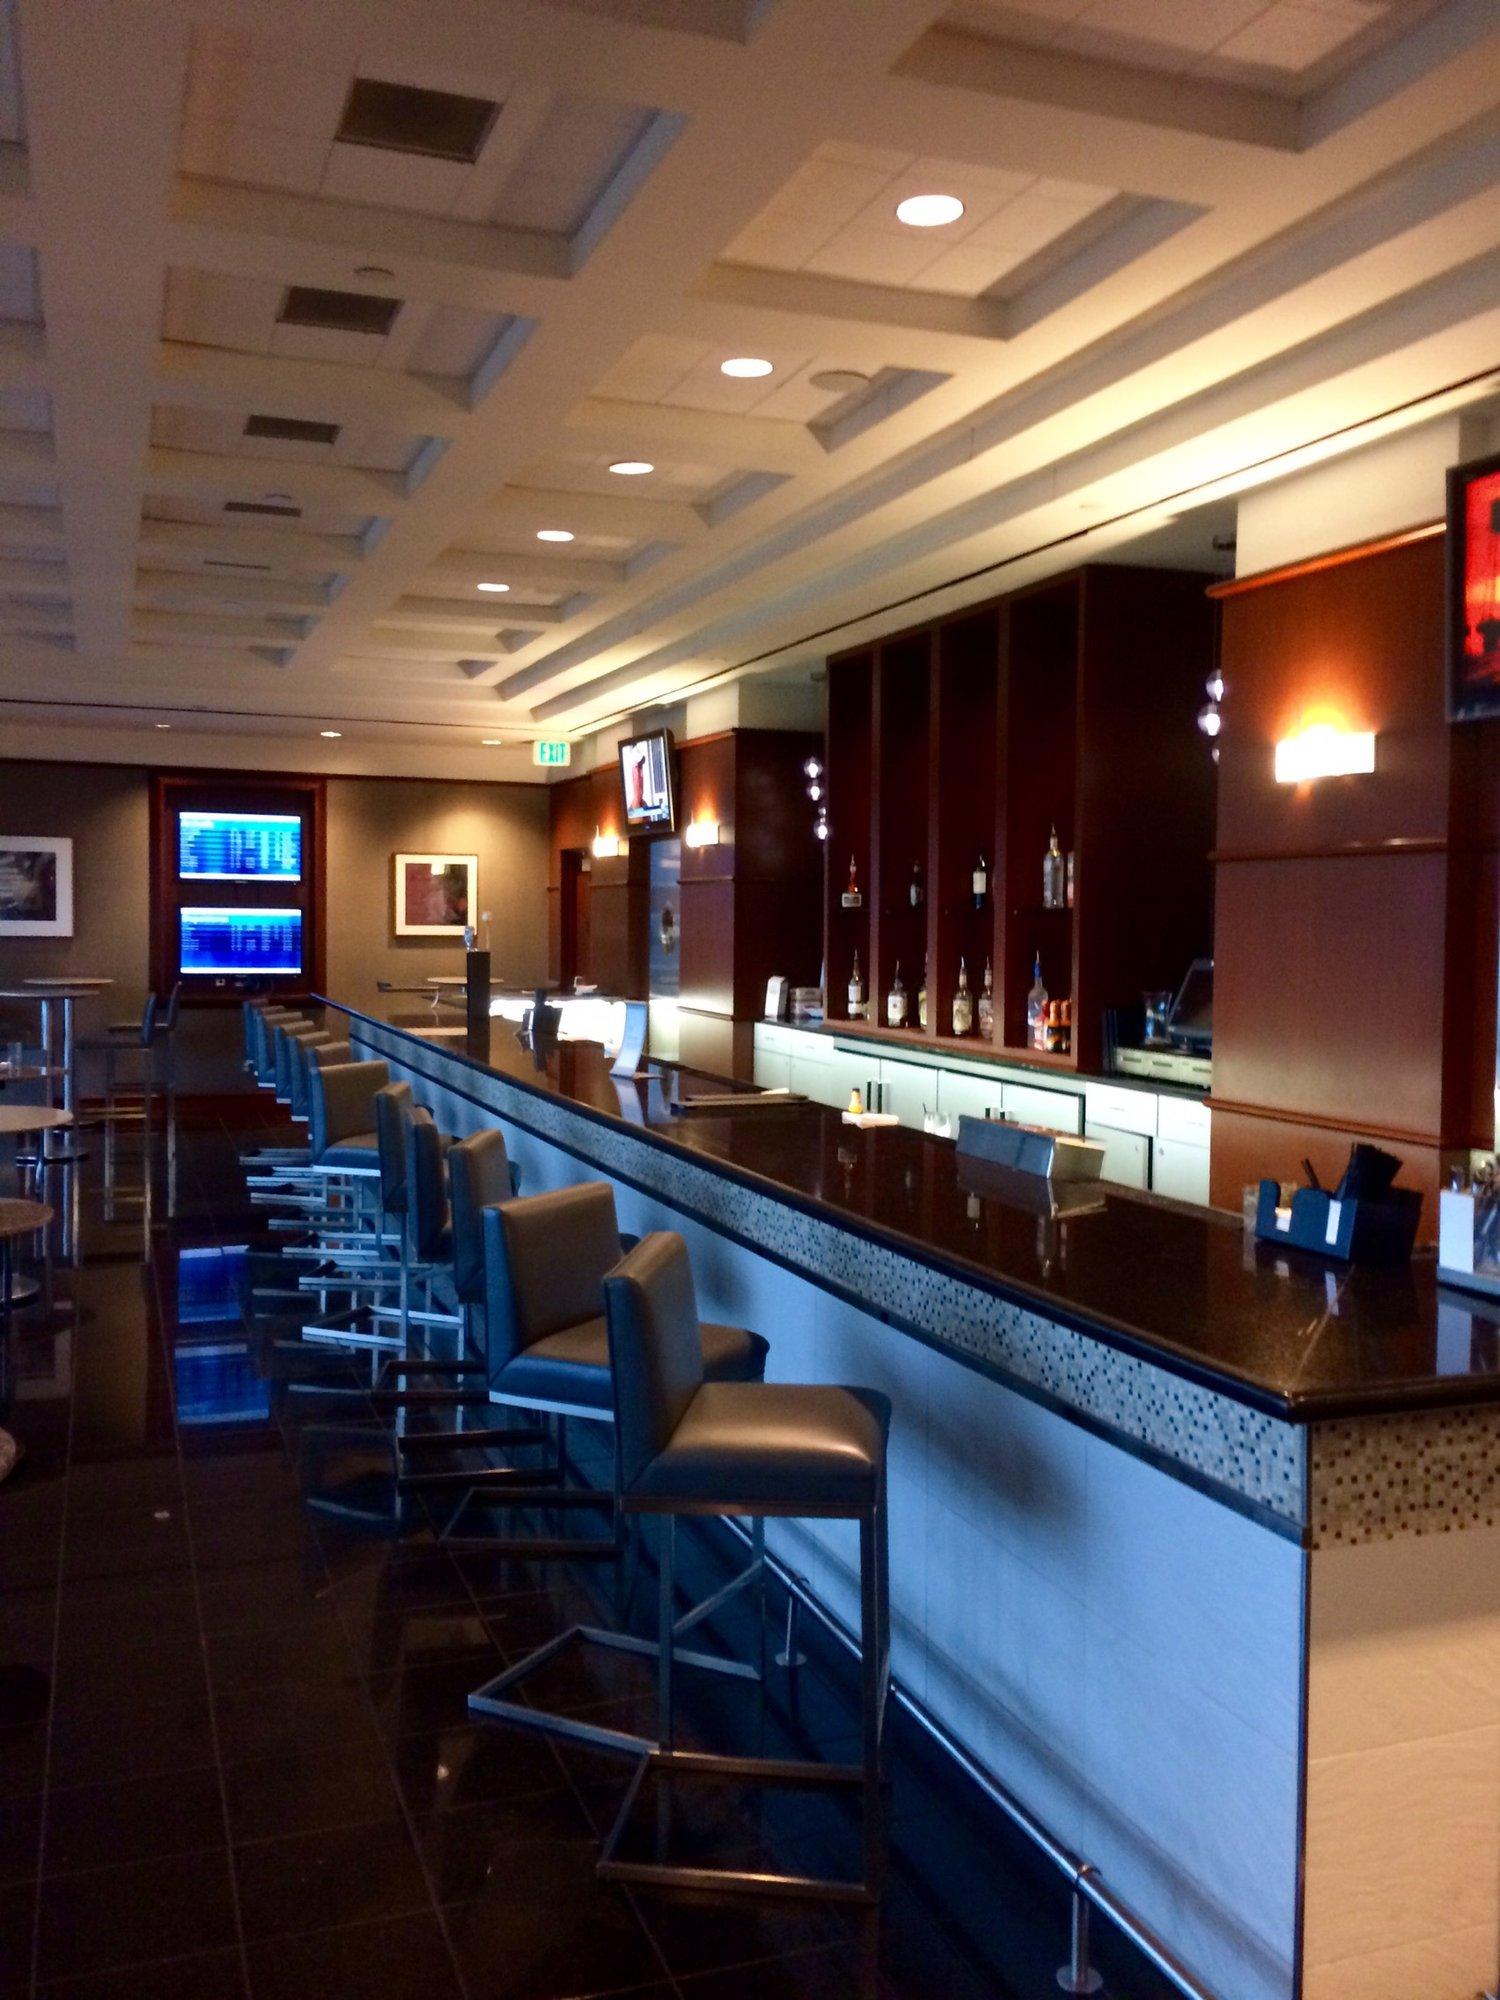 American Airlines Admirals Club image 11 of 12